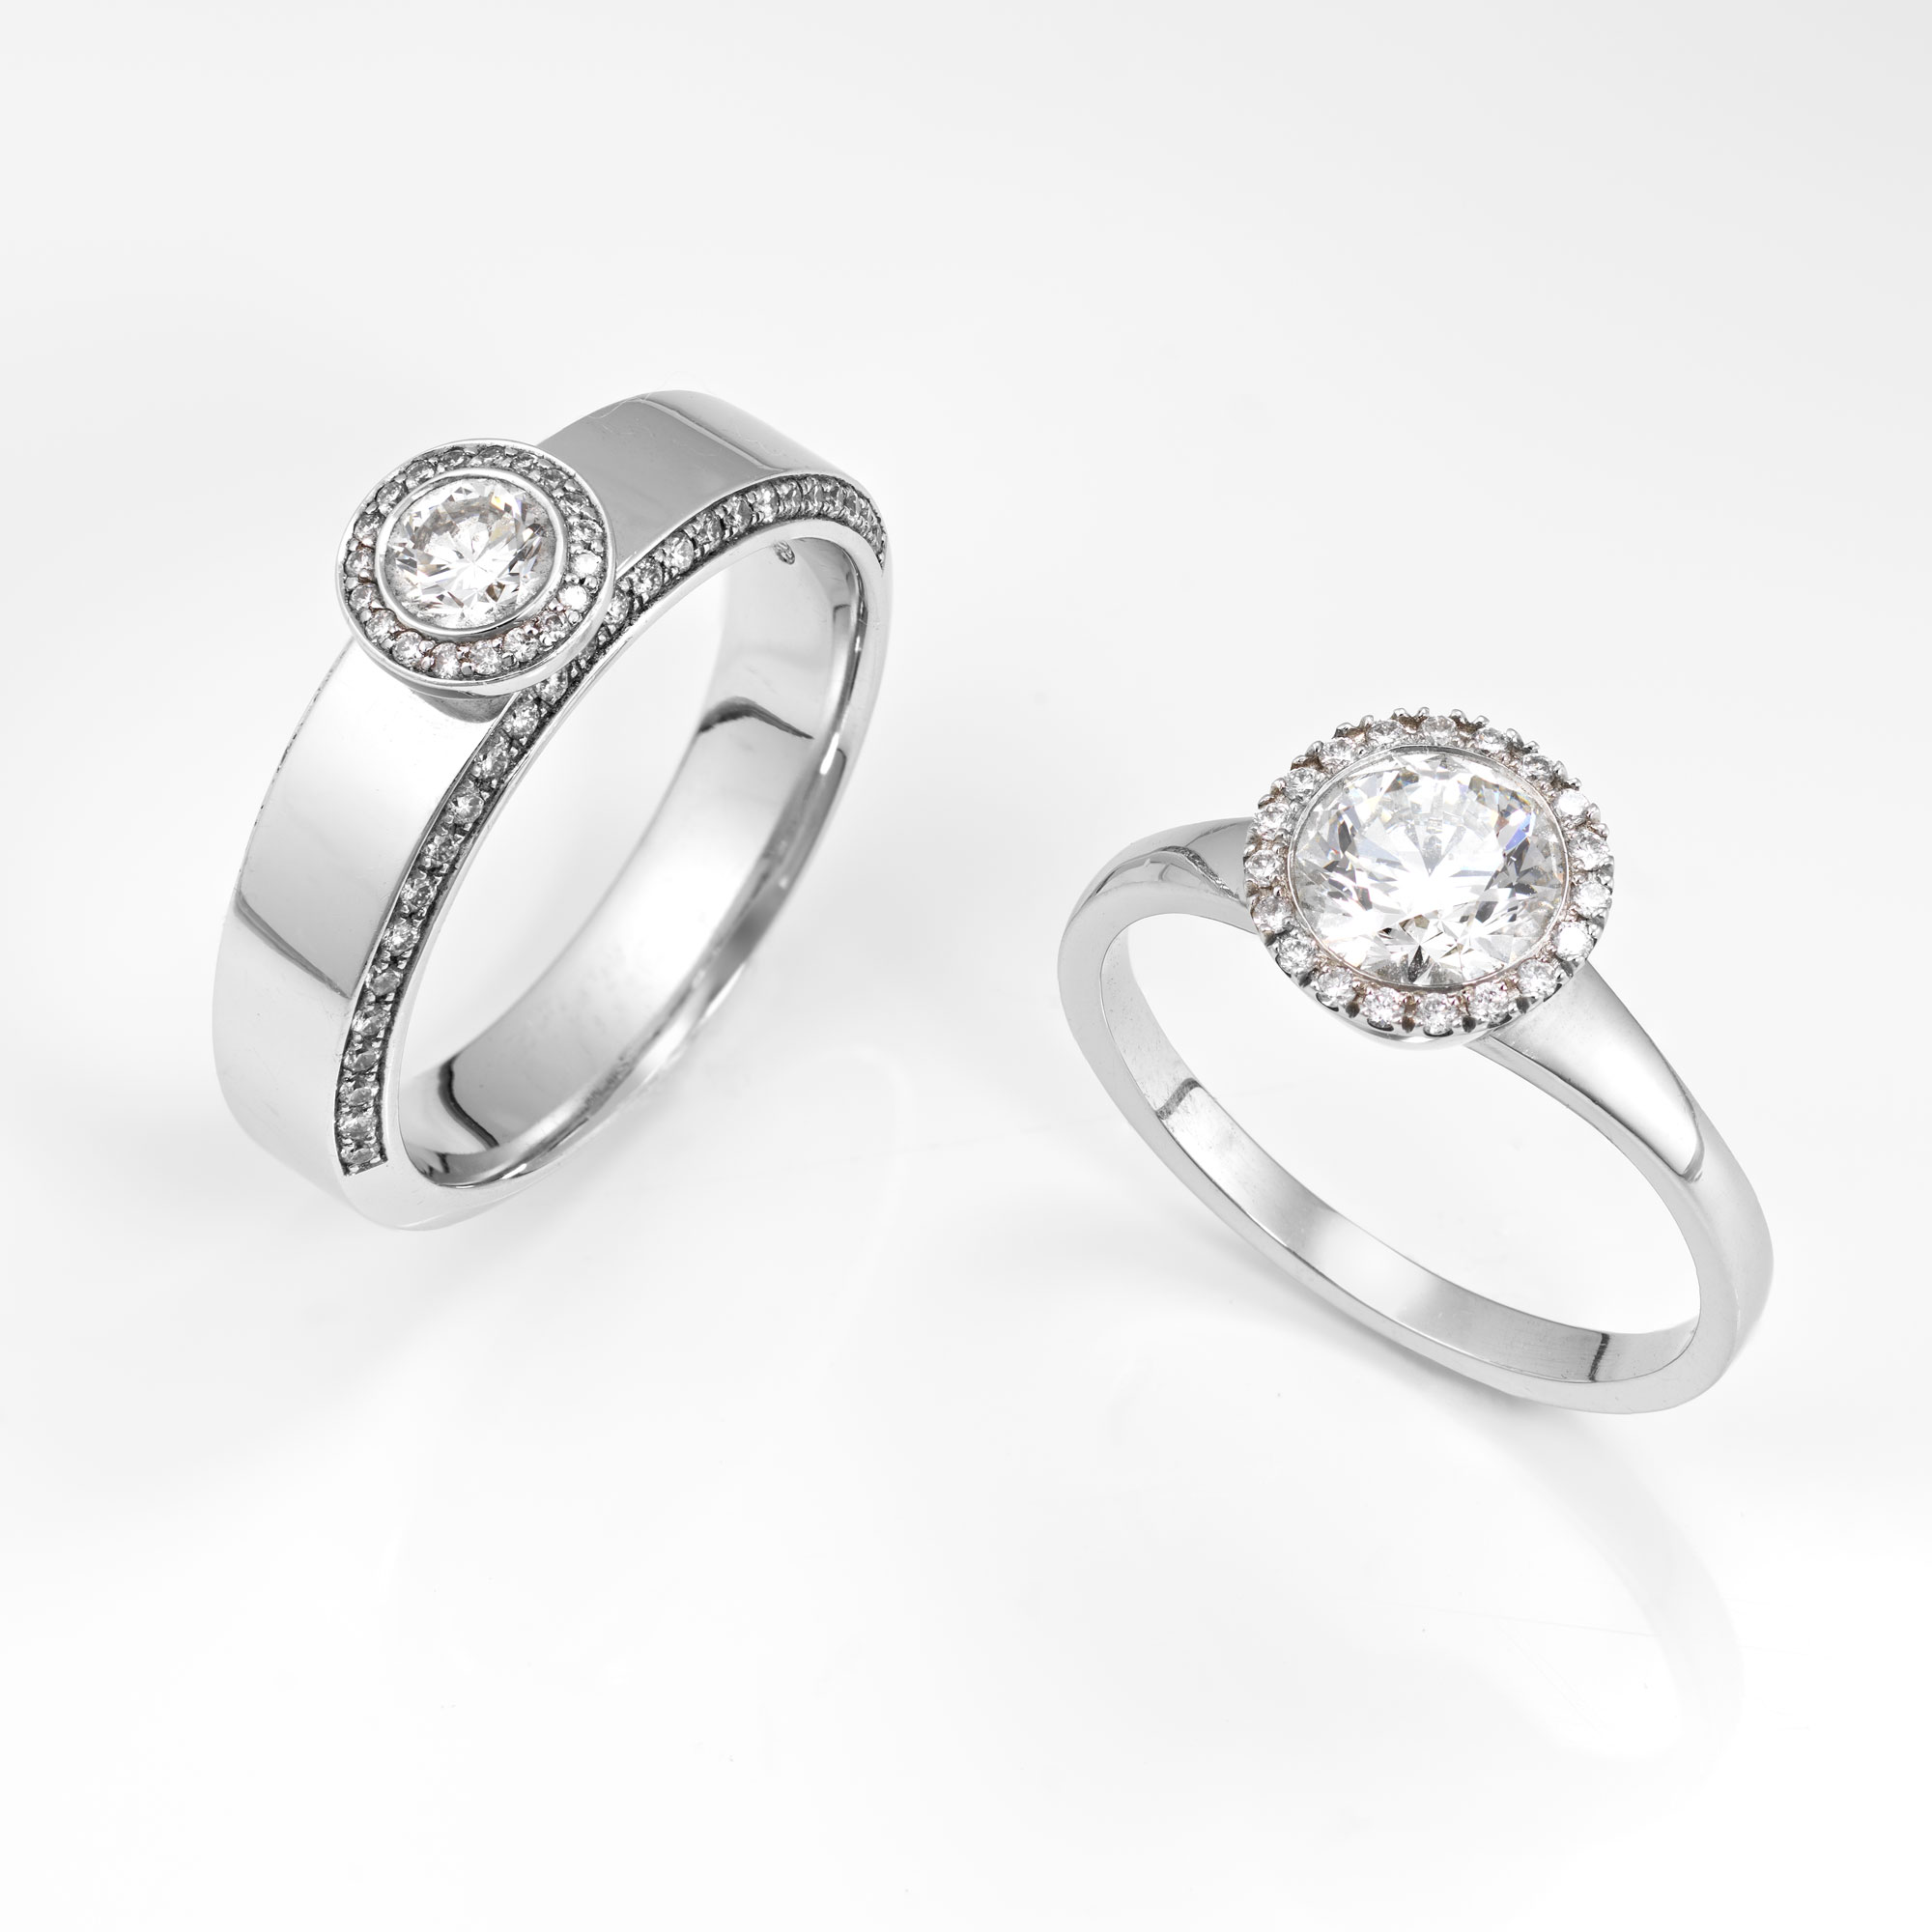 Diamond ring photography - The finished result